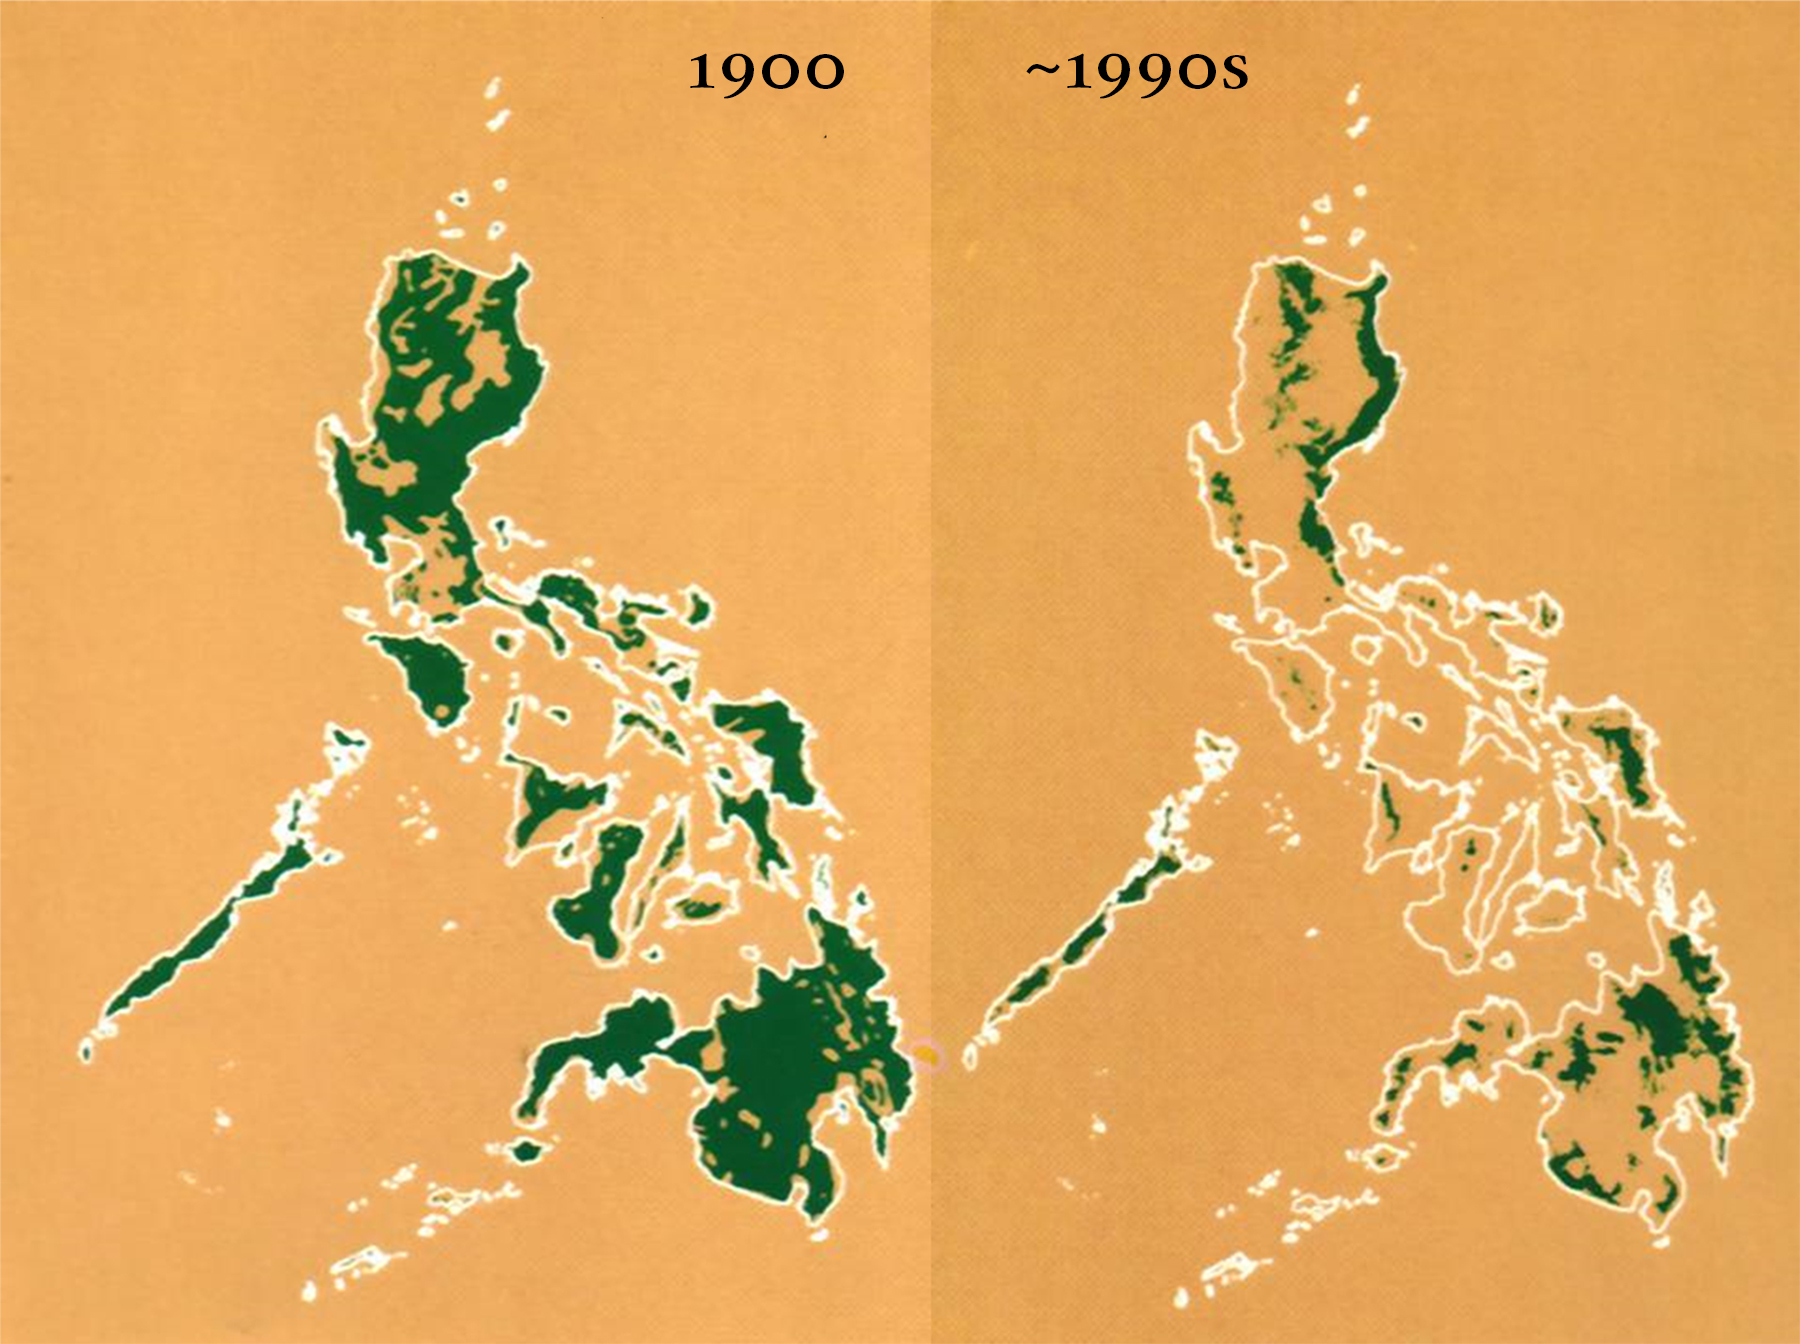 Map showing rapid deforestation of old growth forests in the Philippines 